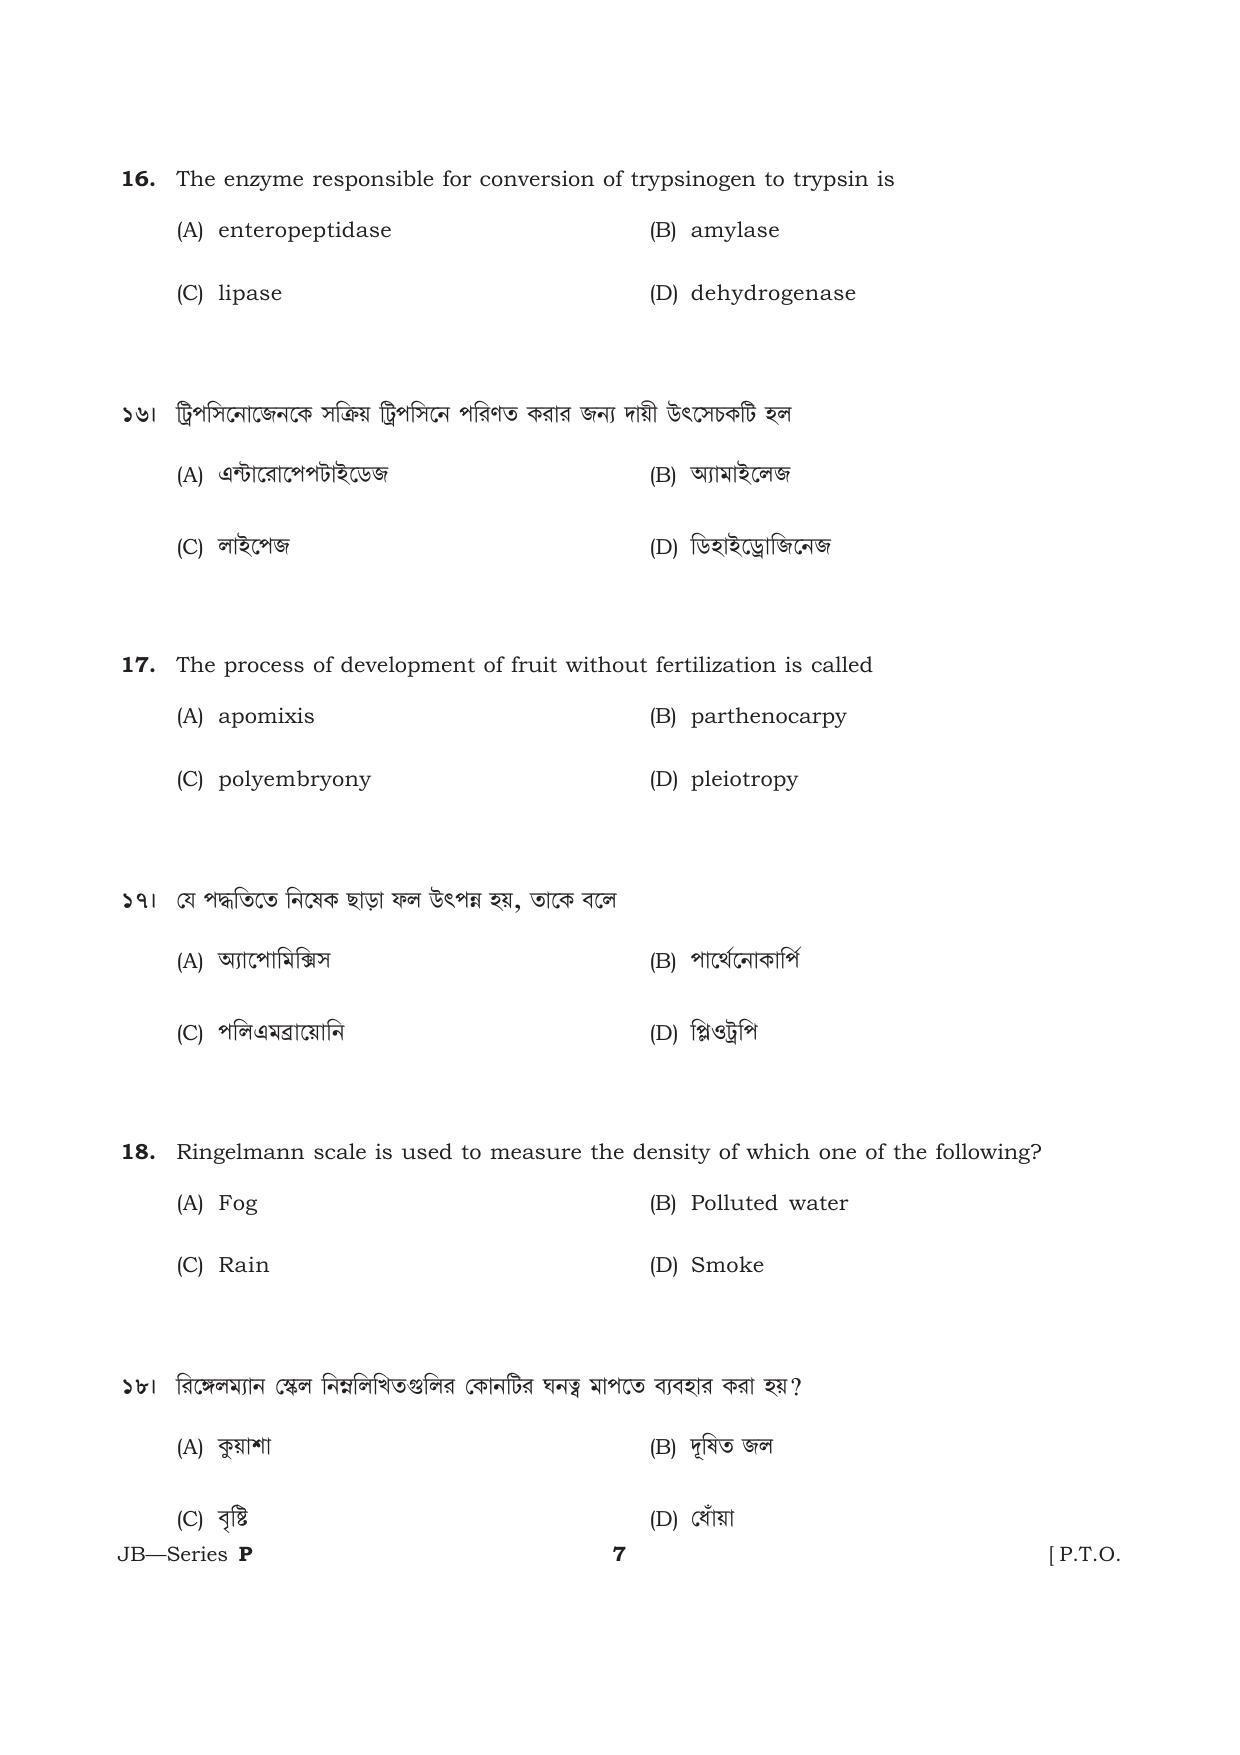 TBJEE Question Paper 2021 - Biology - Page 7